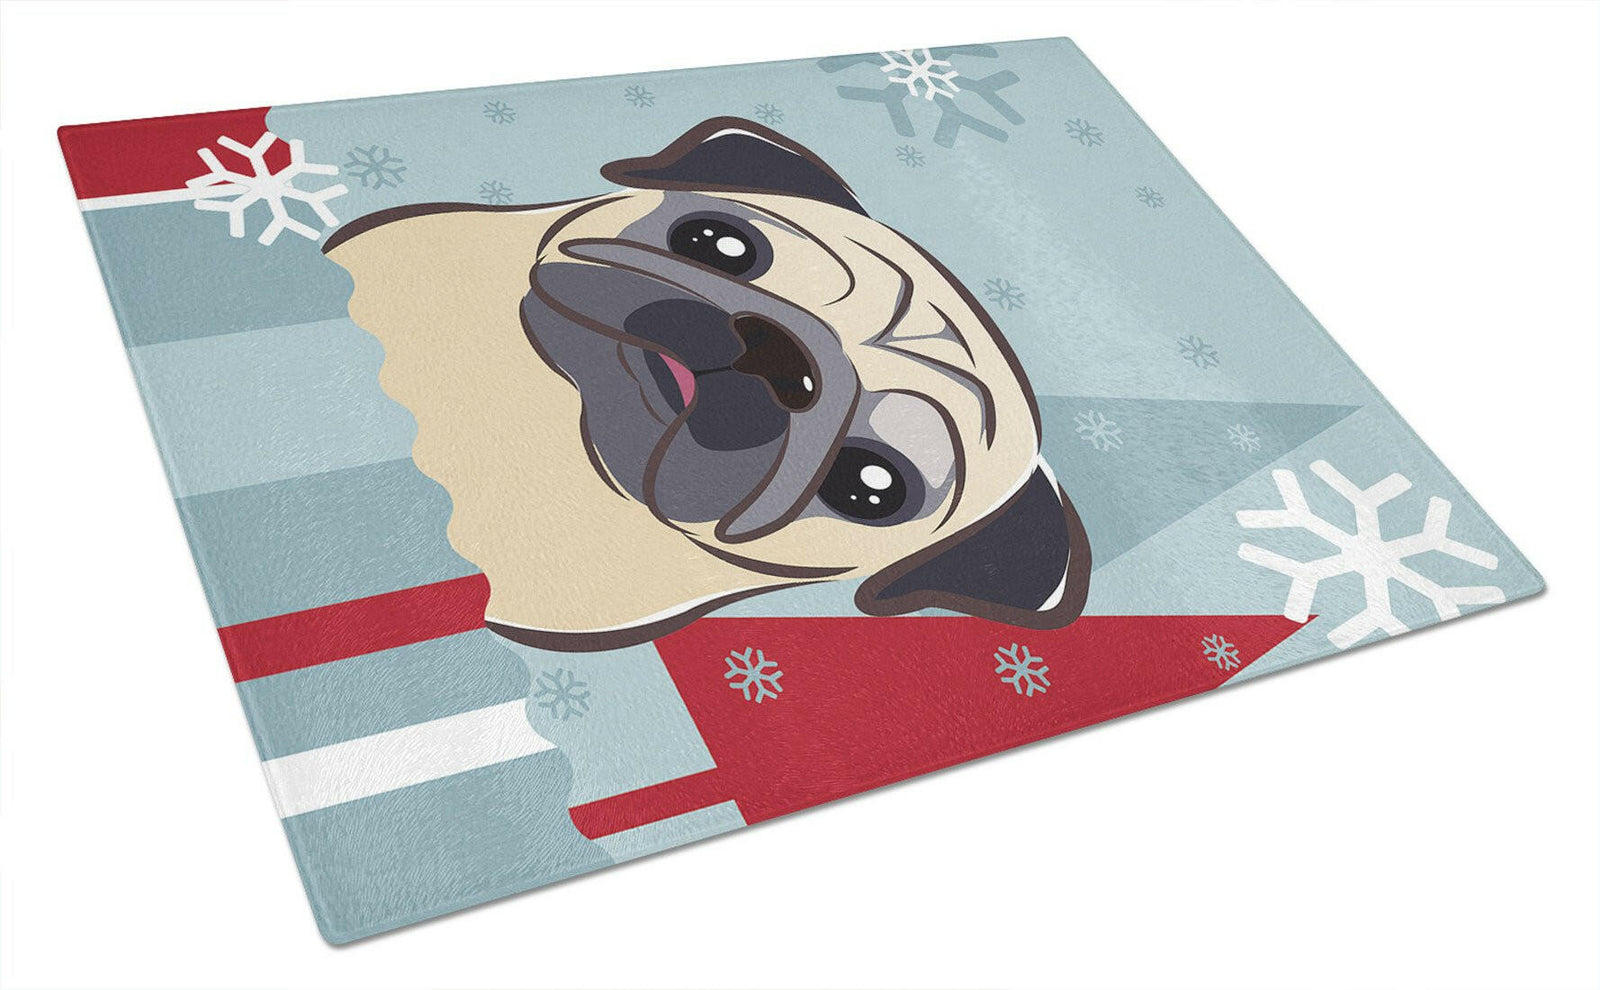 Winter Holiday Fawn Pug Glass Cutting Board Large BB1758LCB by Caroline's Treasures